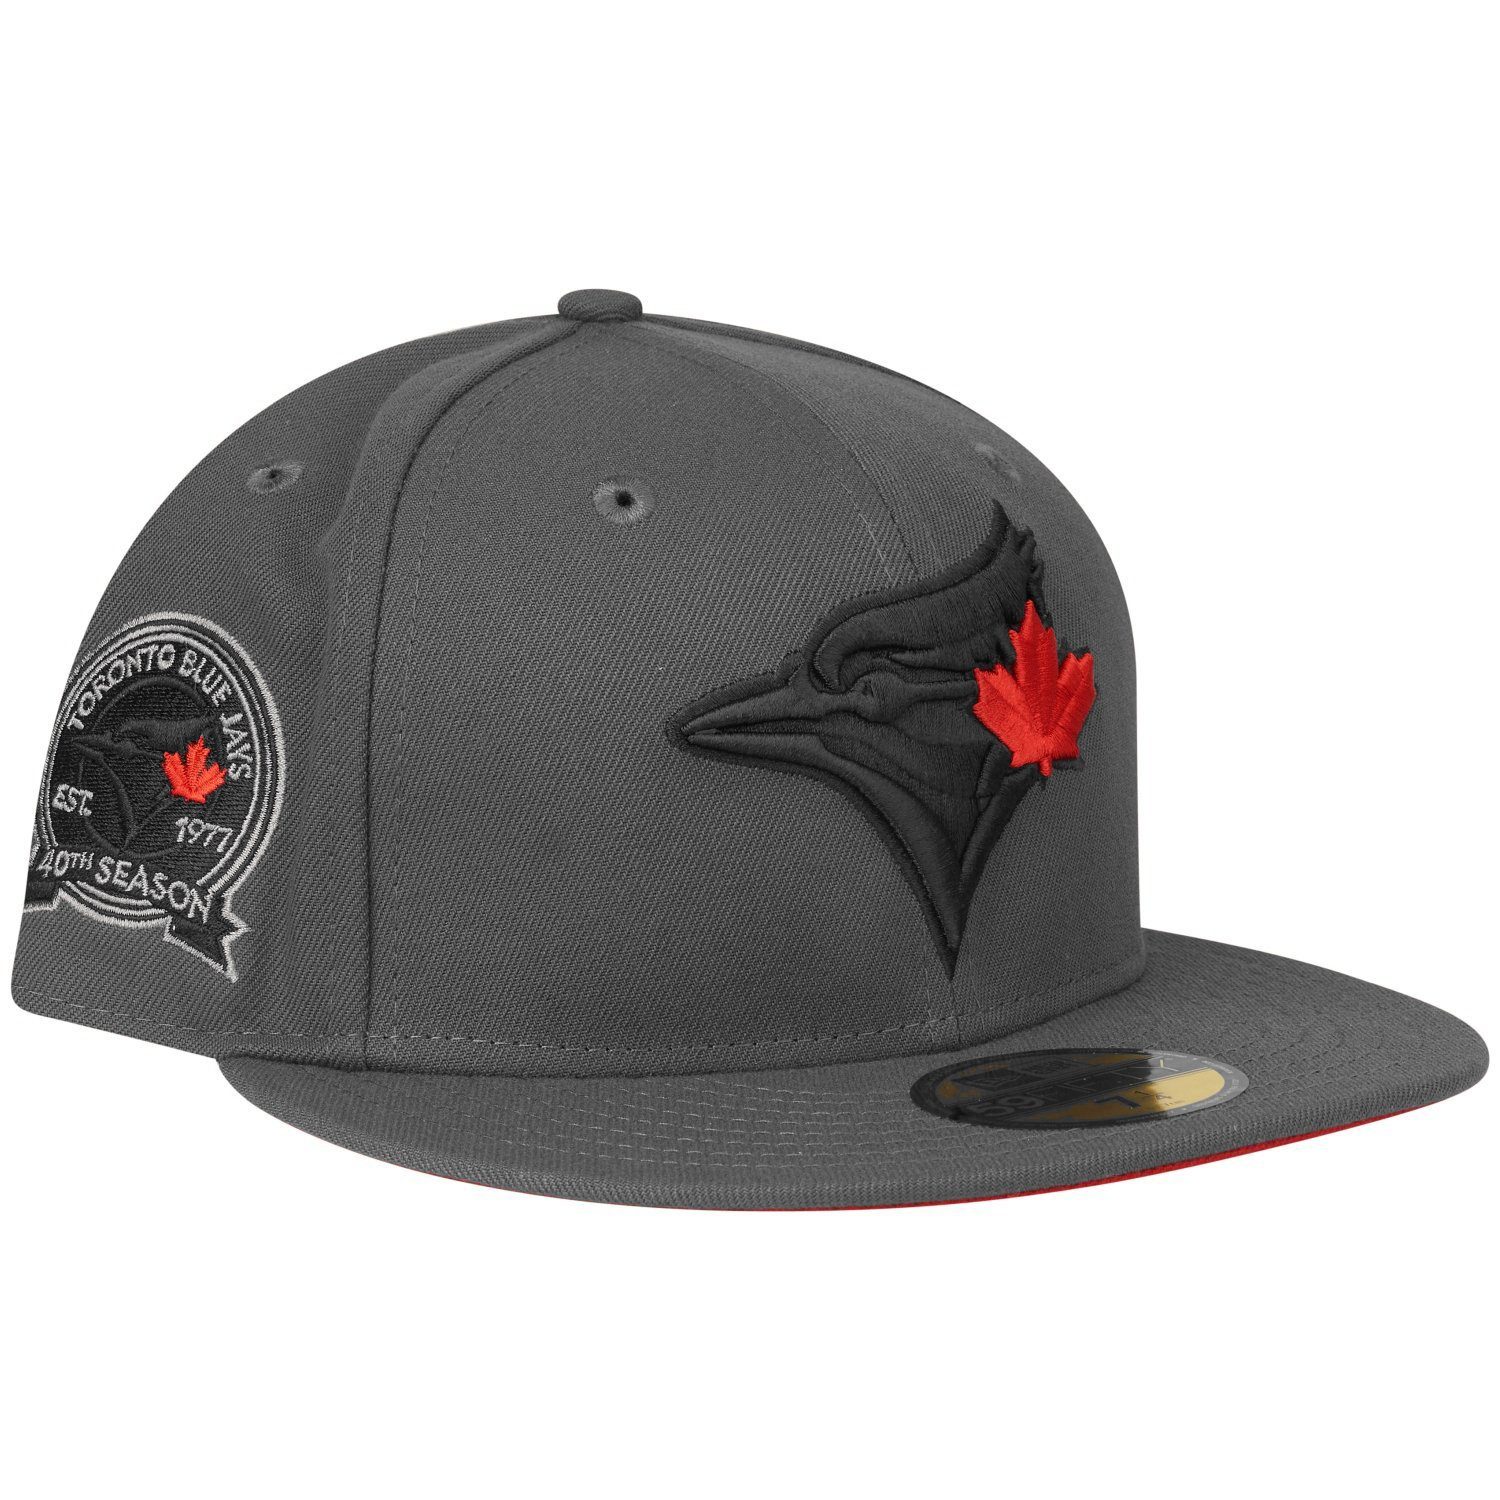 59Fifty Fitted Cap MLB Toronto 40th Era New Jays